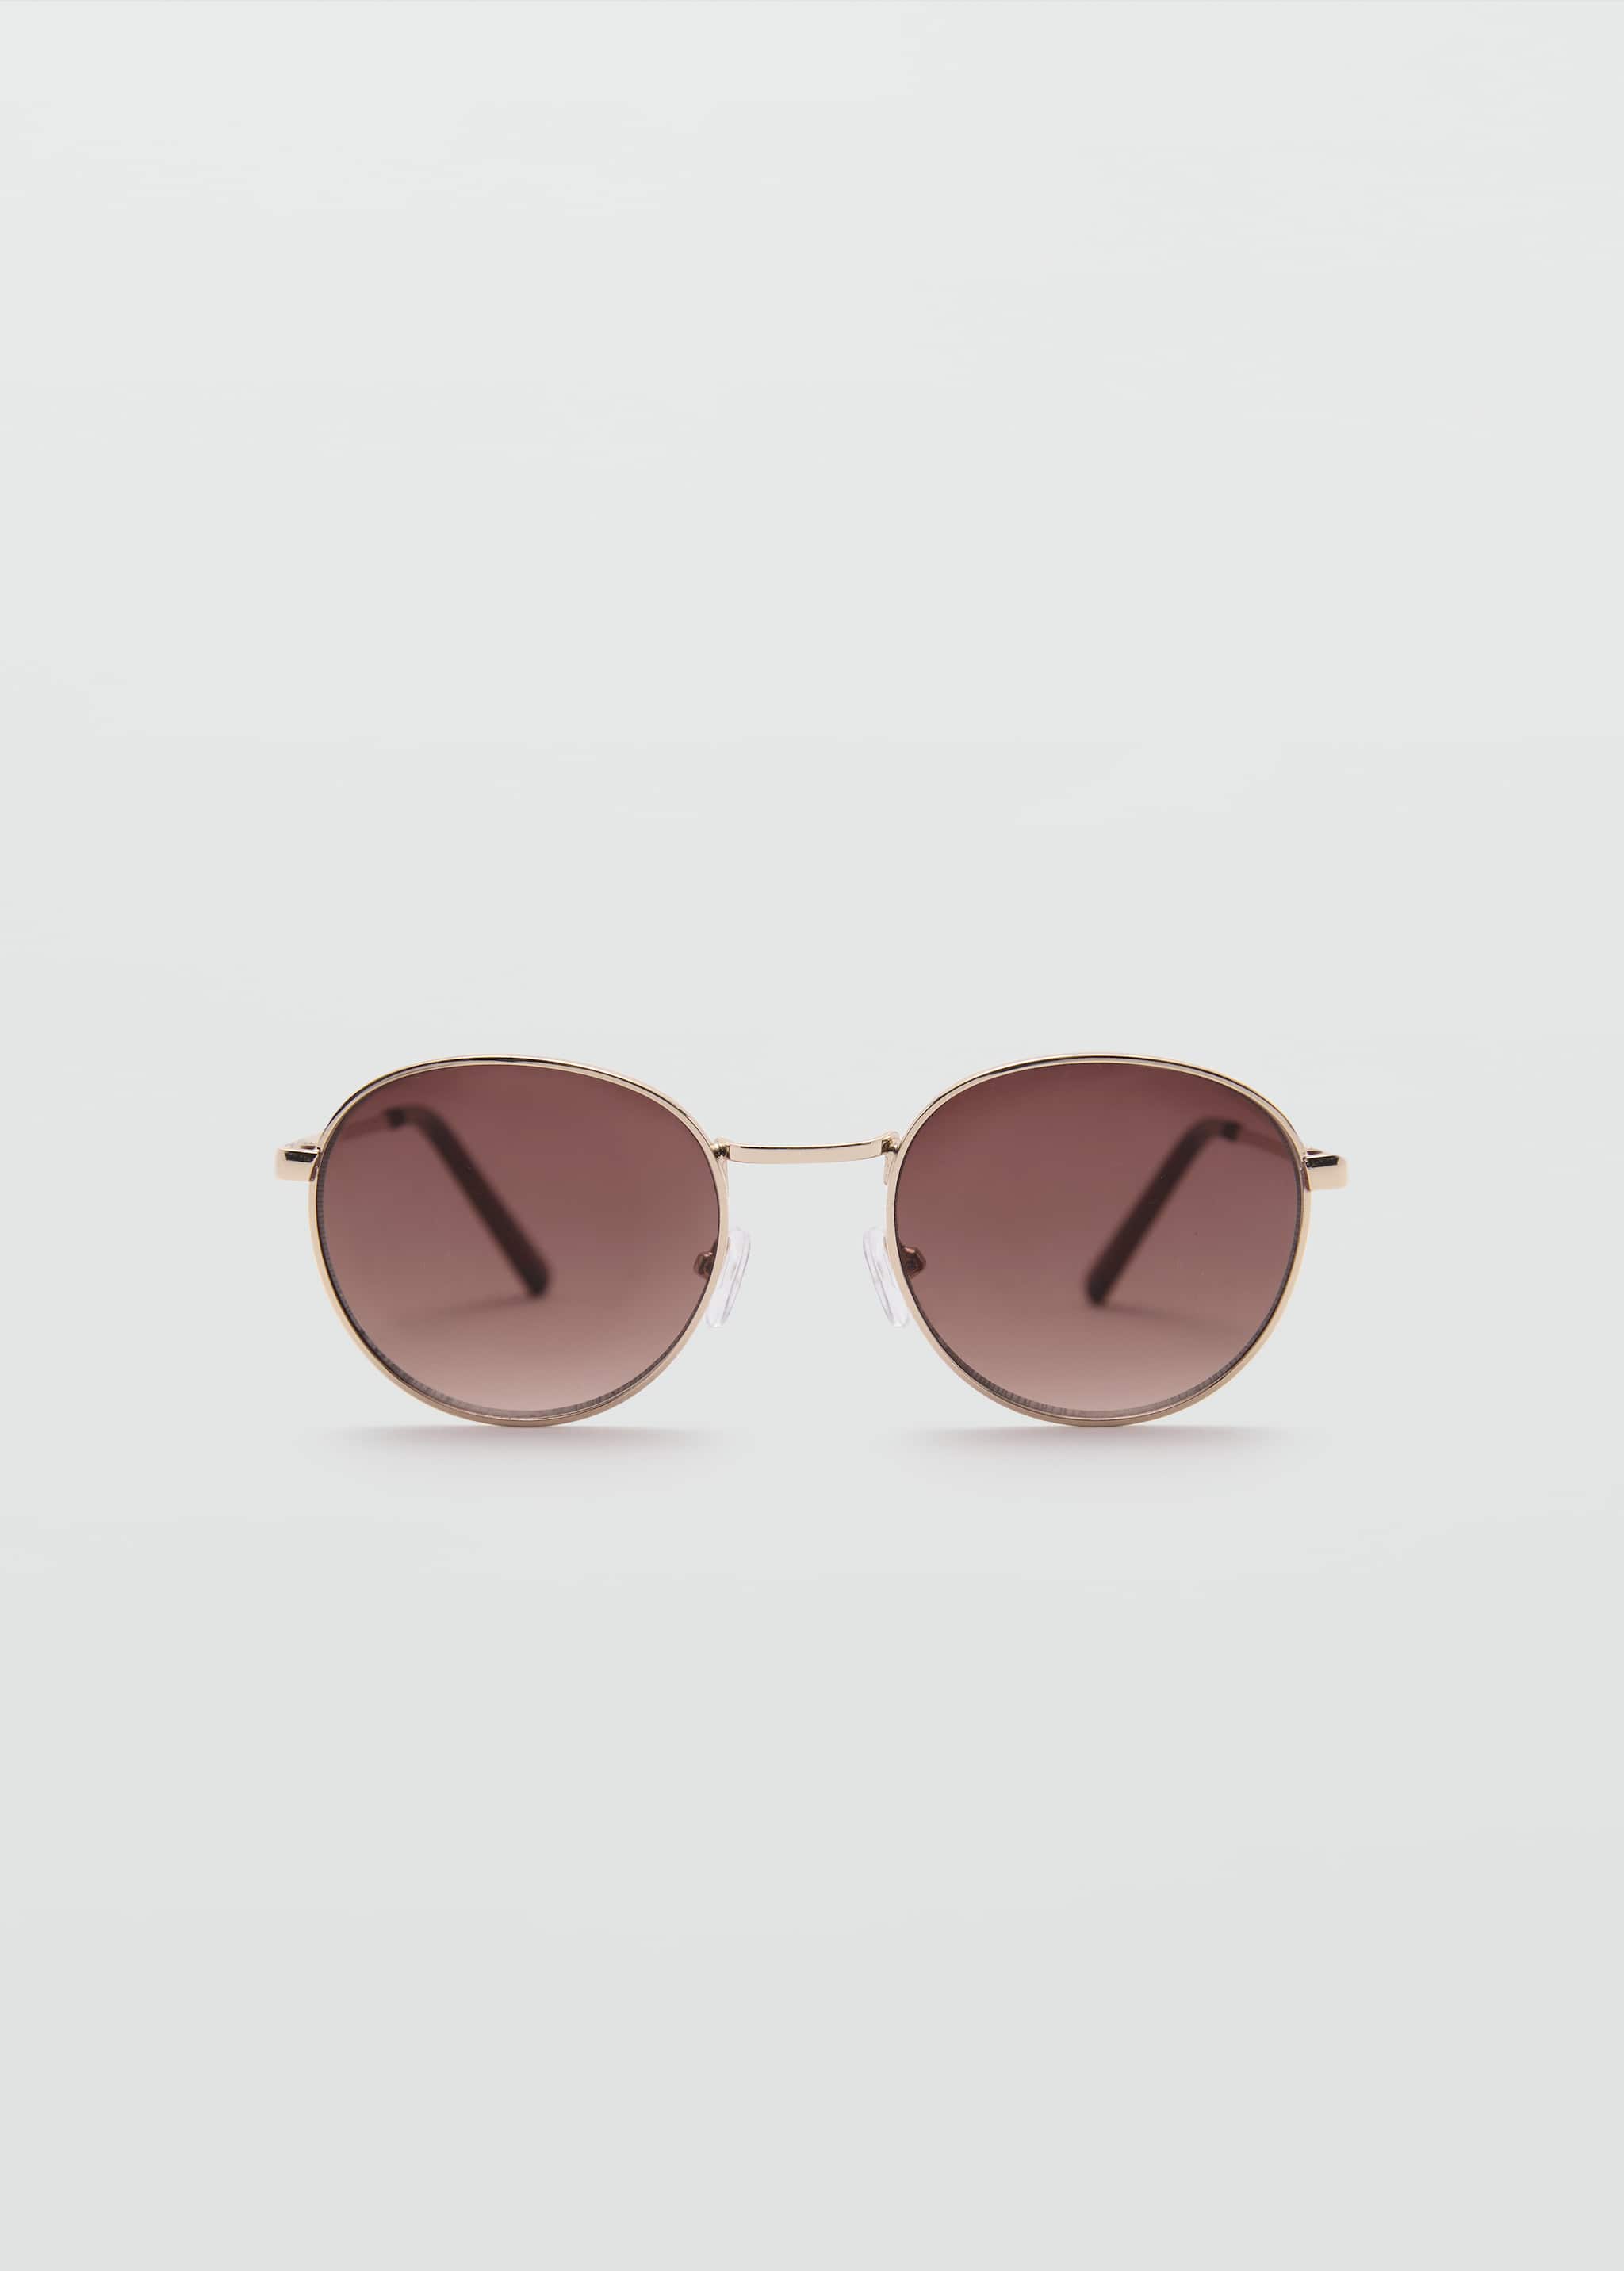 Round metal-rimmed sunglasses - Article without model